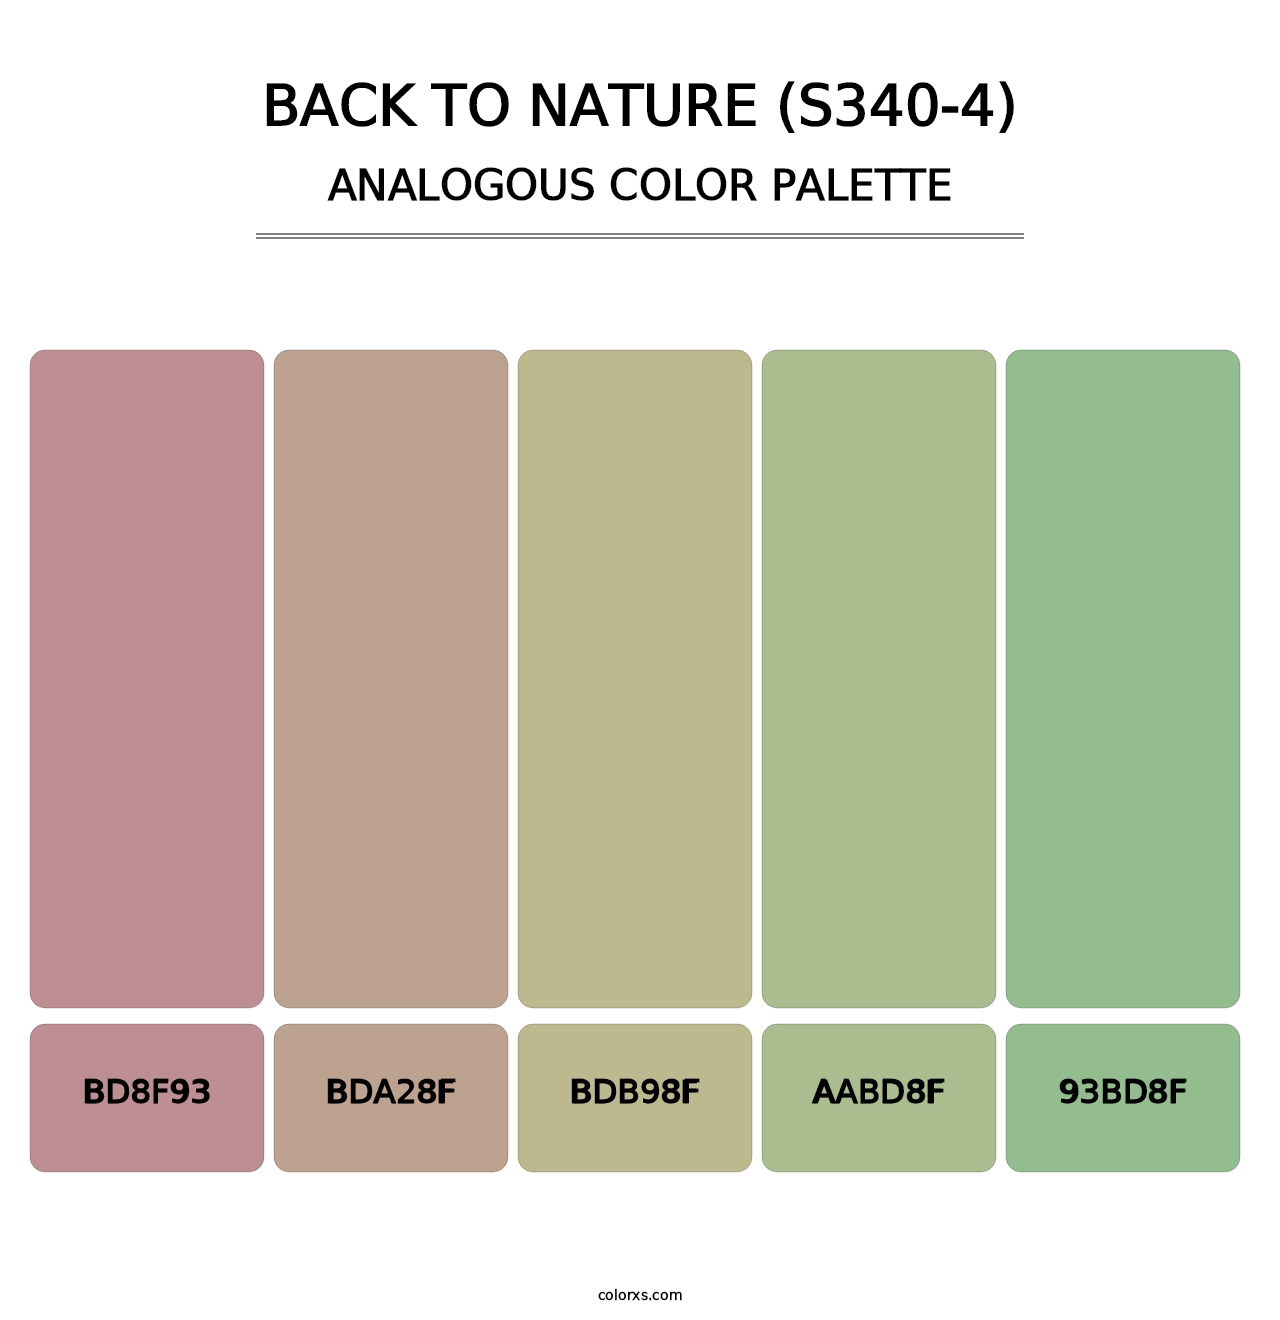 Back To Nature (S340-4) - Analogous Color Palette